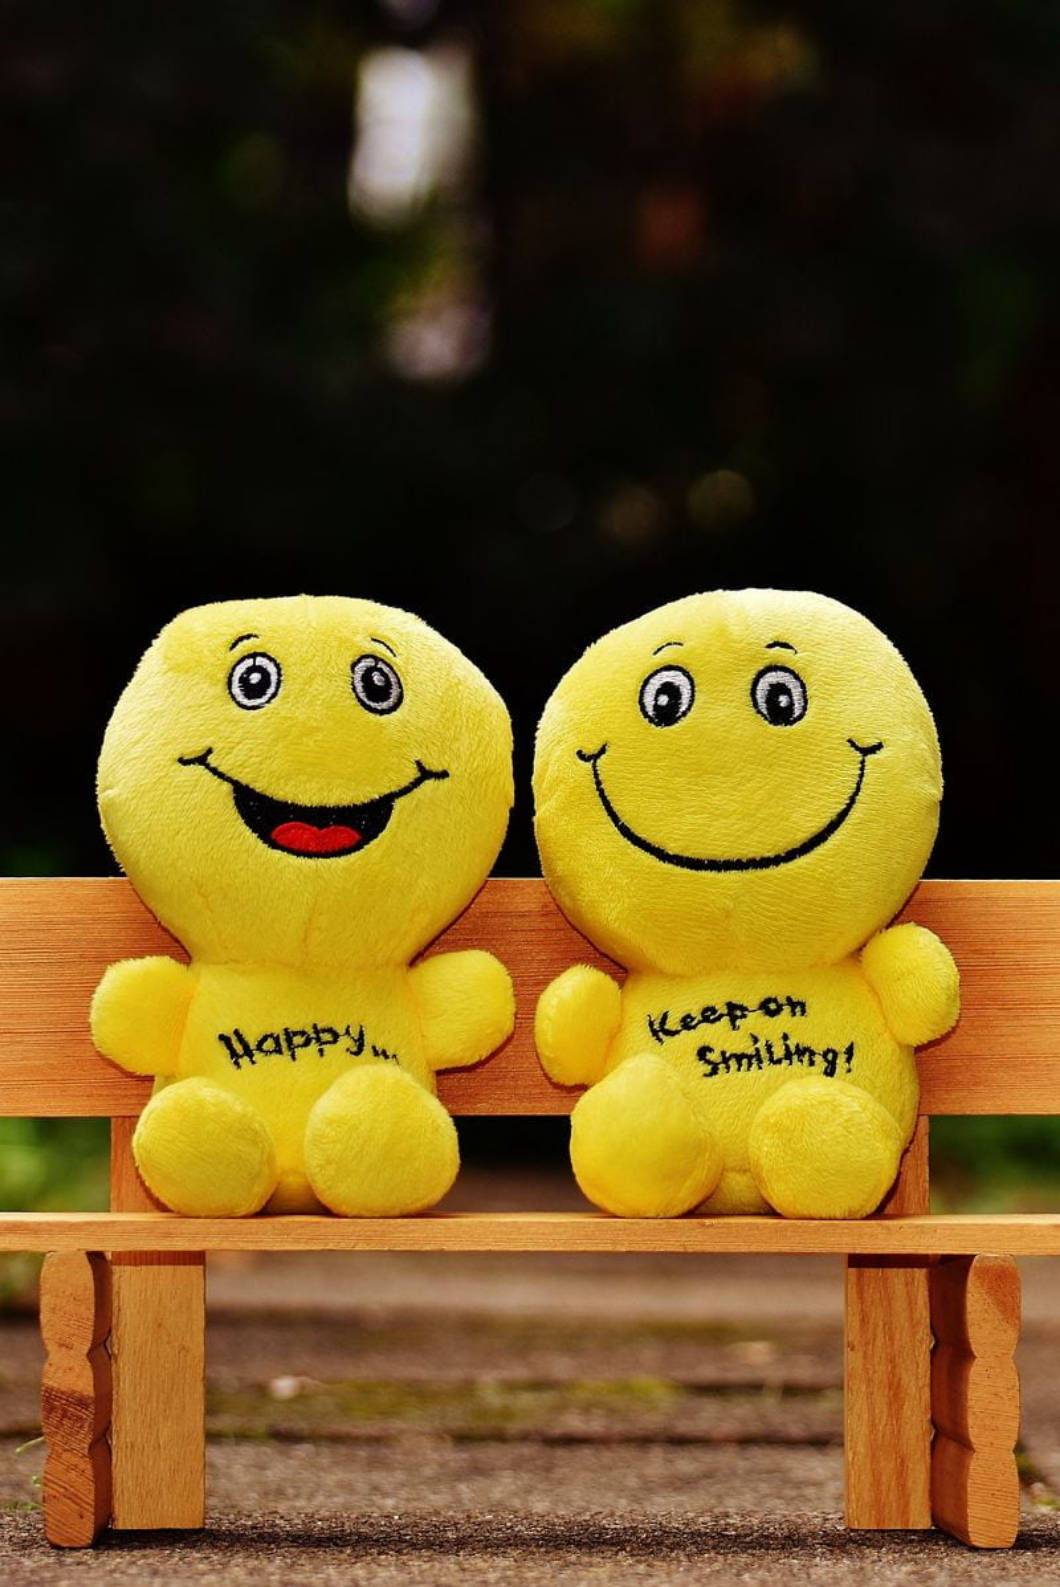 Smiley Stuffed Toys iPhone 4s Wallpaper